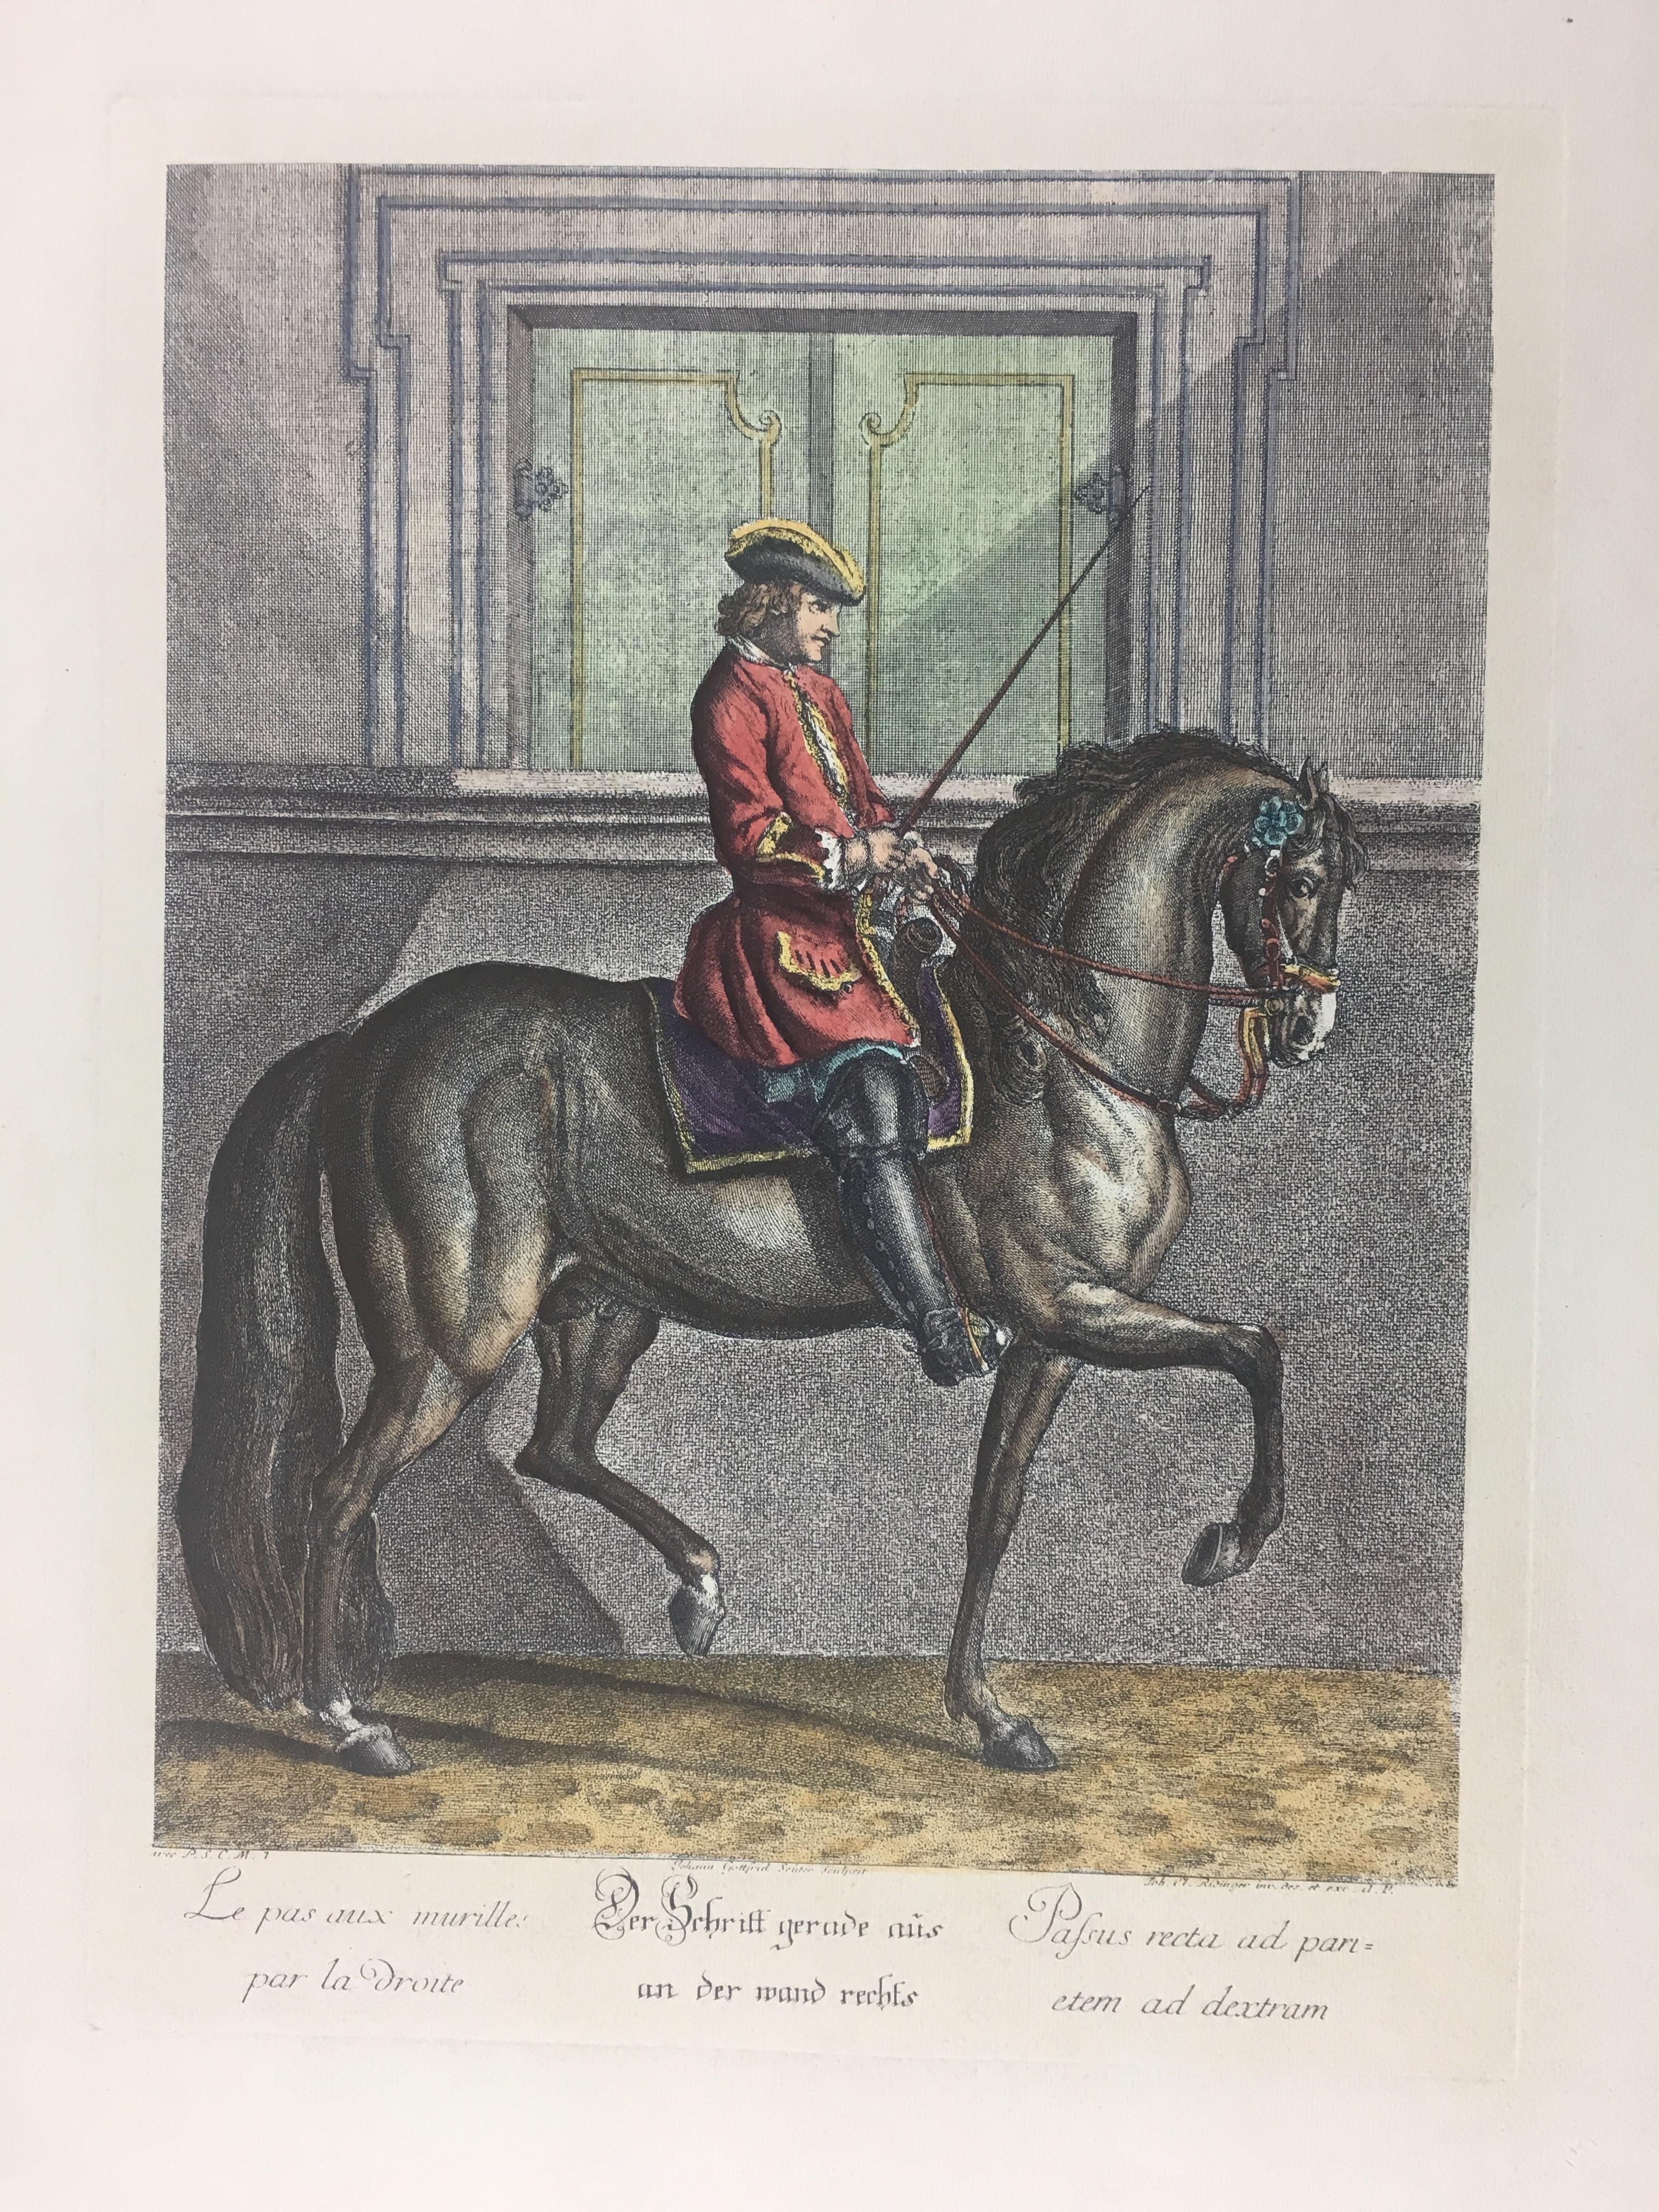 Pair of fine engraving prints each hand colored. Below each horse and rider are French, German and Latin names of the poses.
   
  